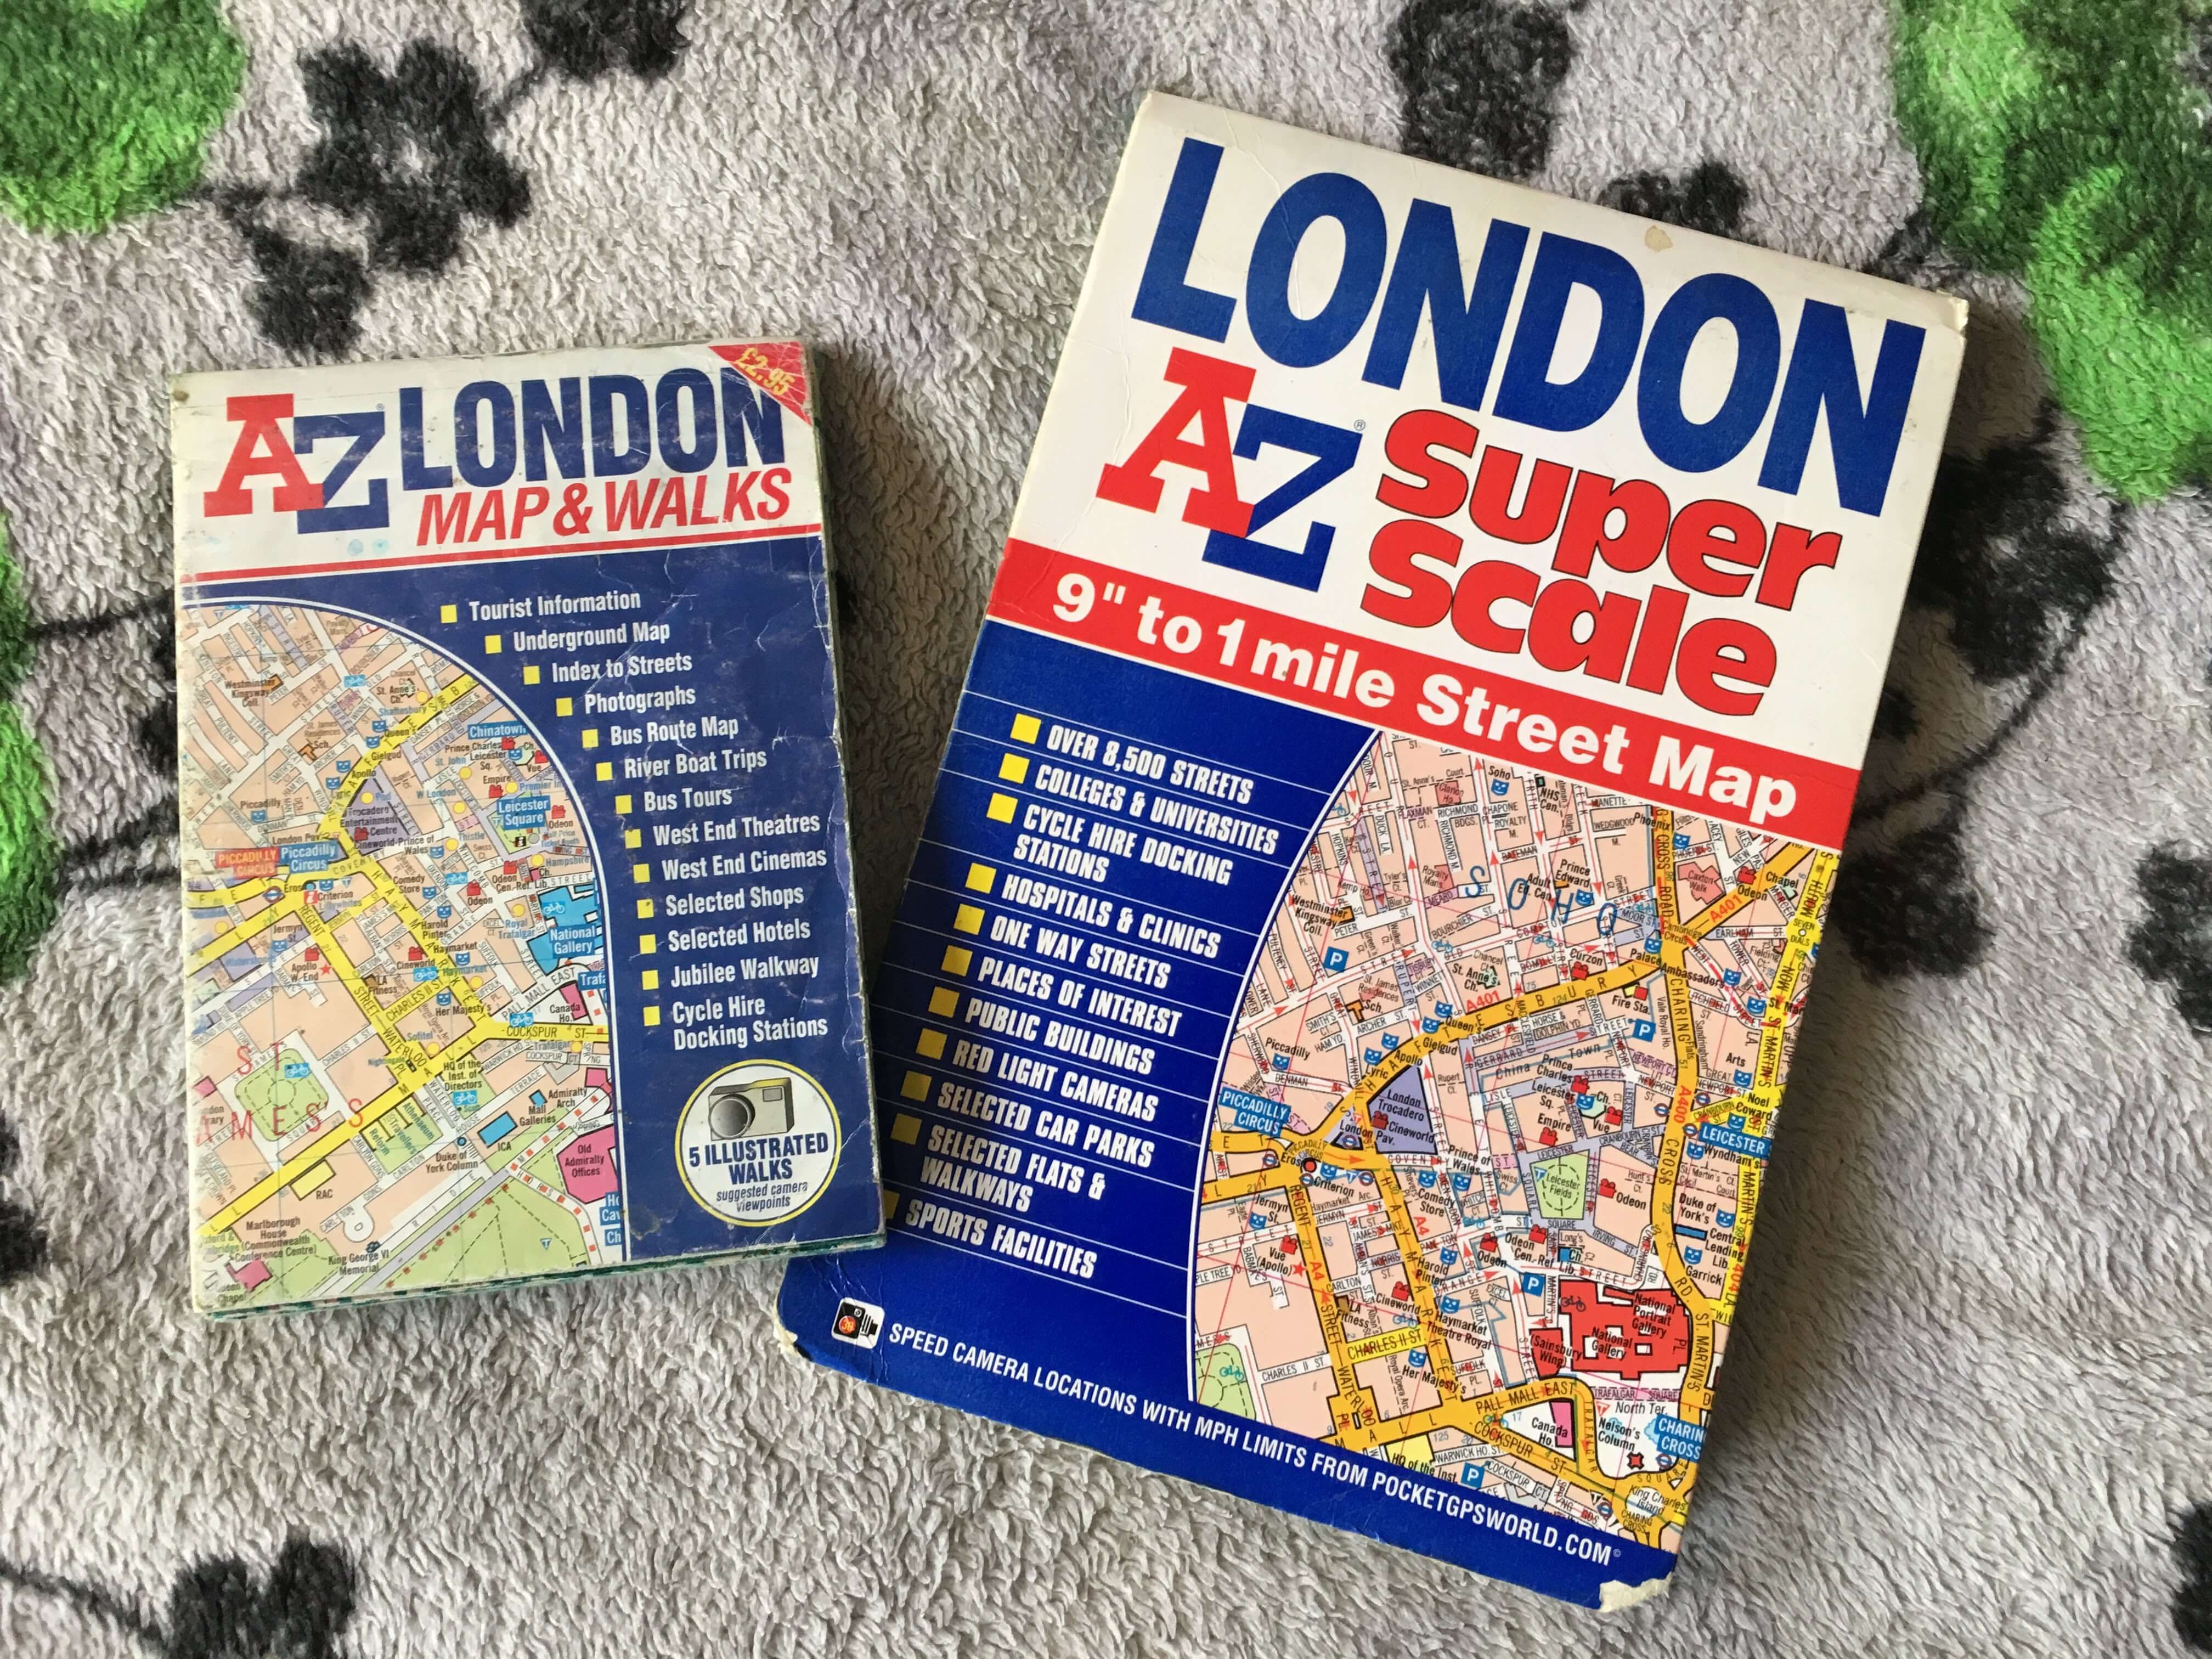 Both of the maps that I mainly used